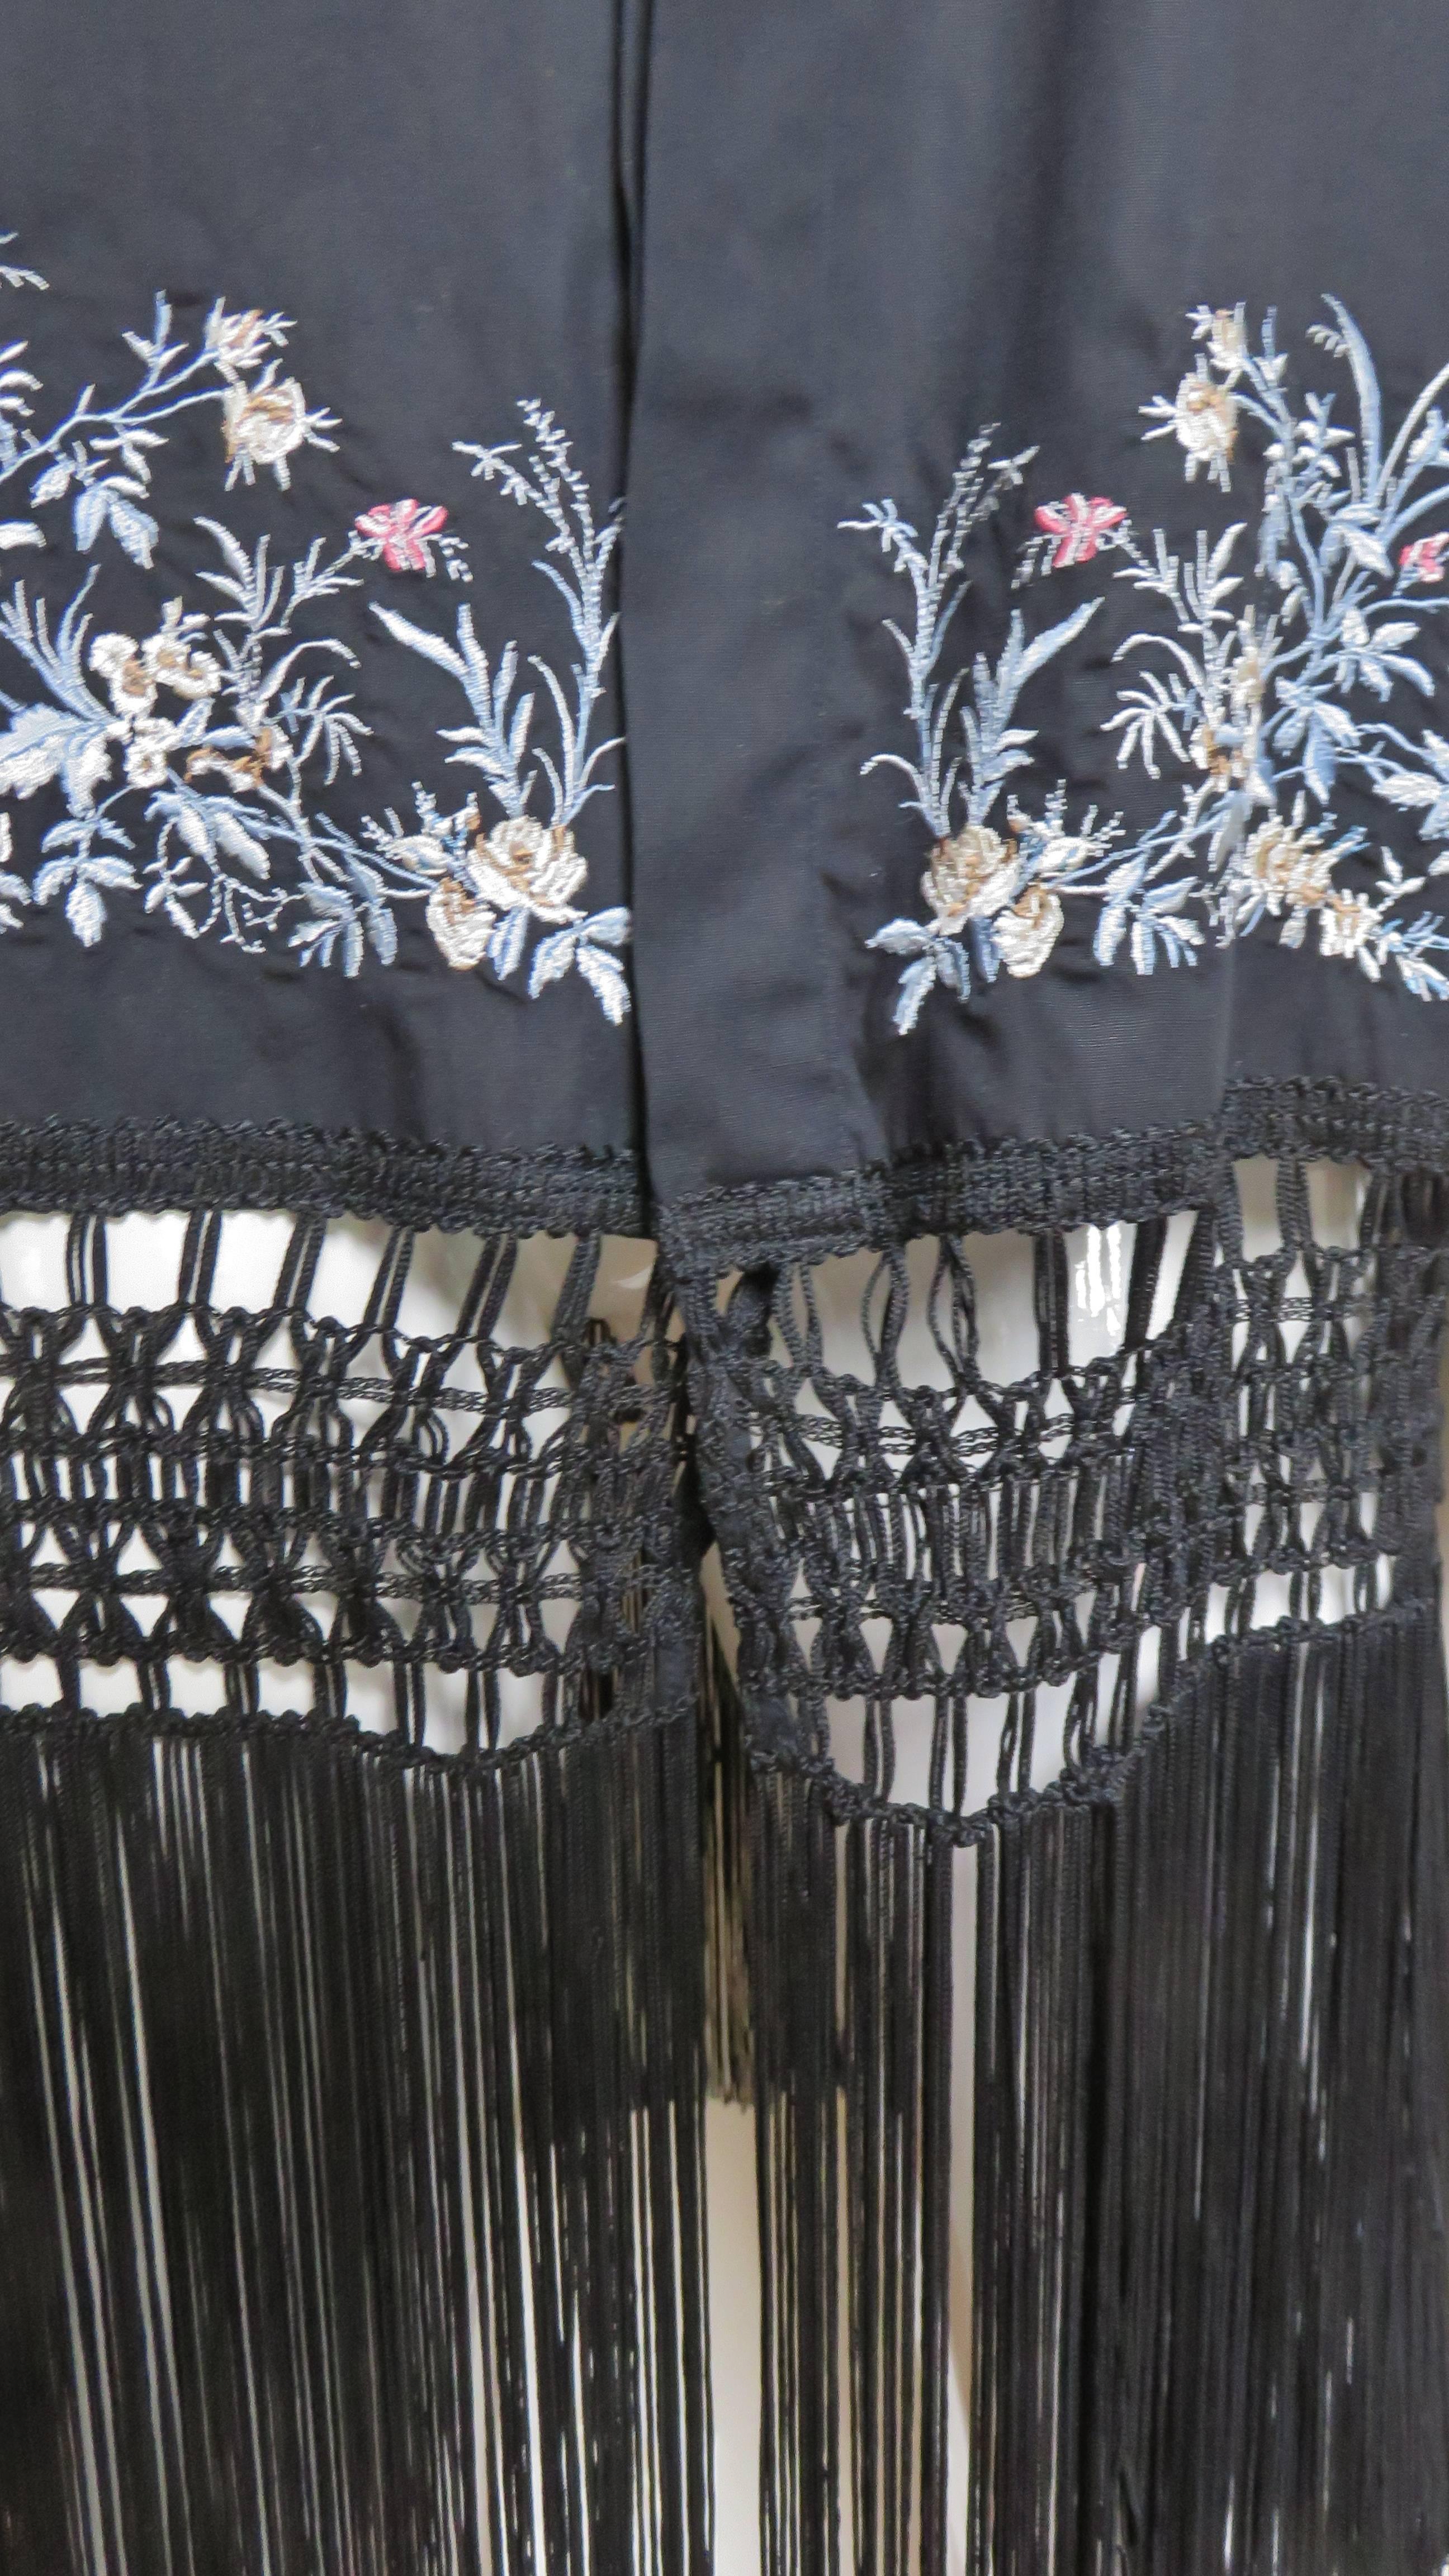 Black Alexander McQueen New Fringe Embroidery Shirt S/S 1999 For Sale